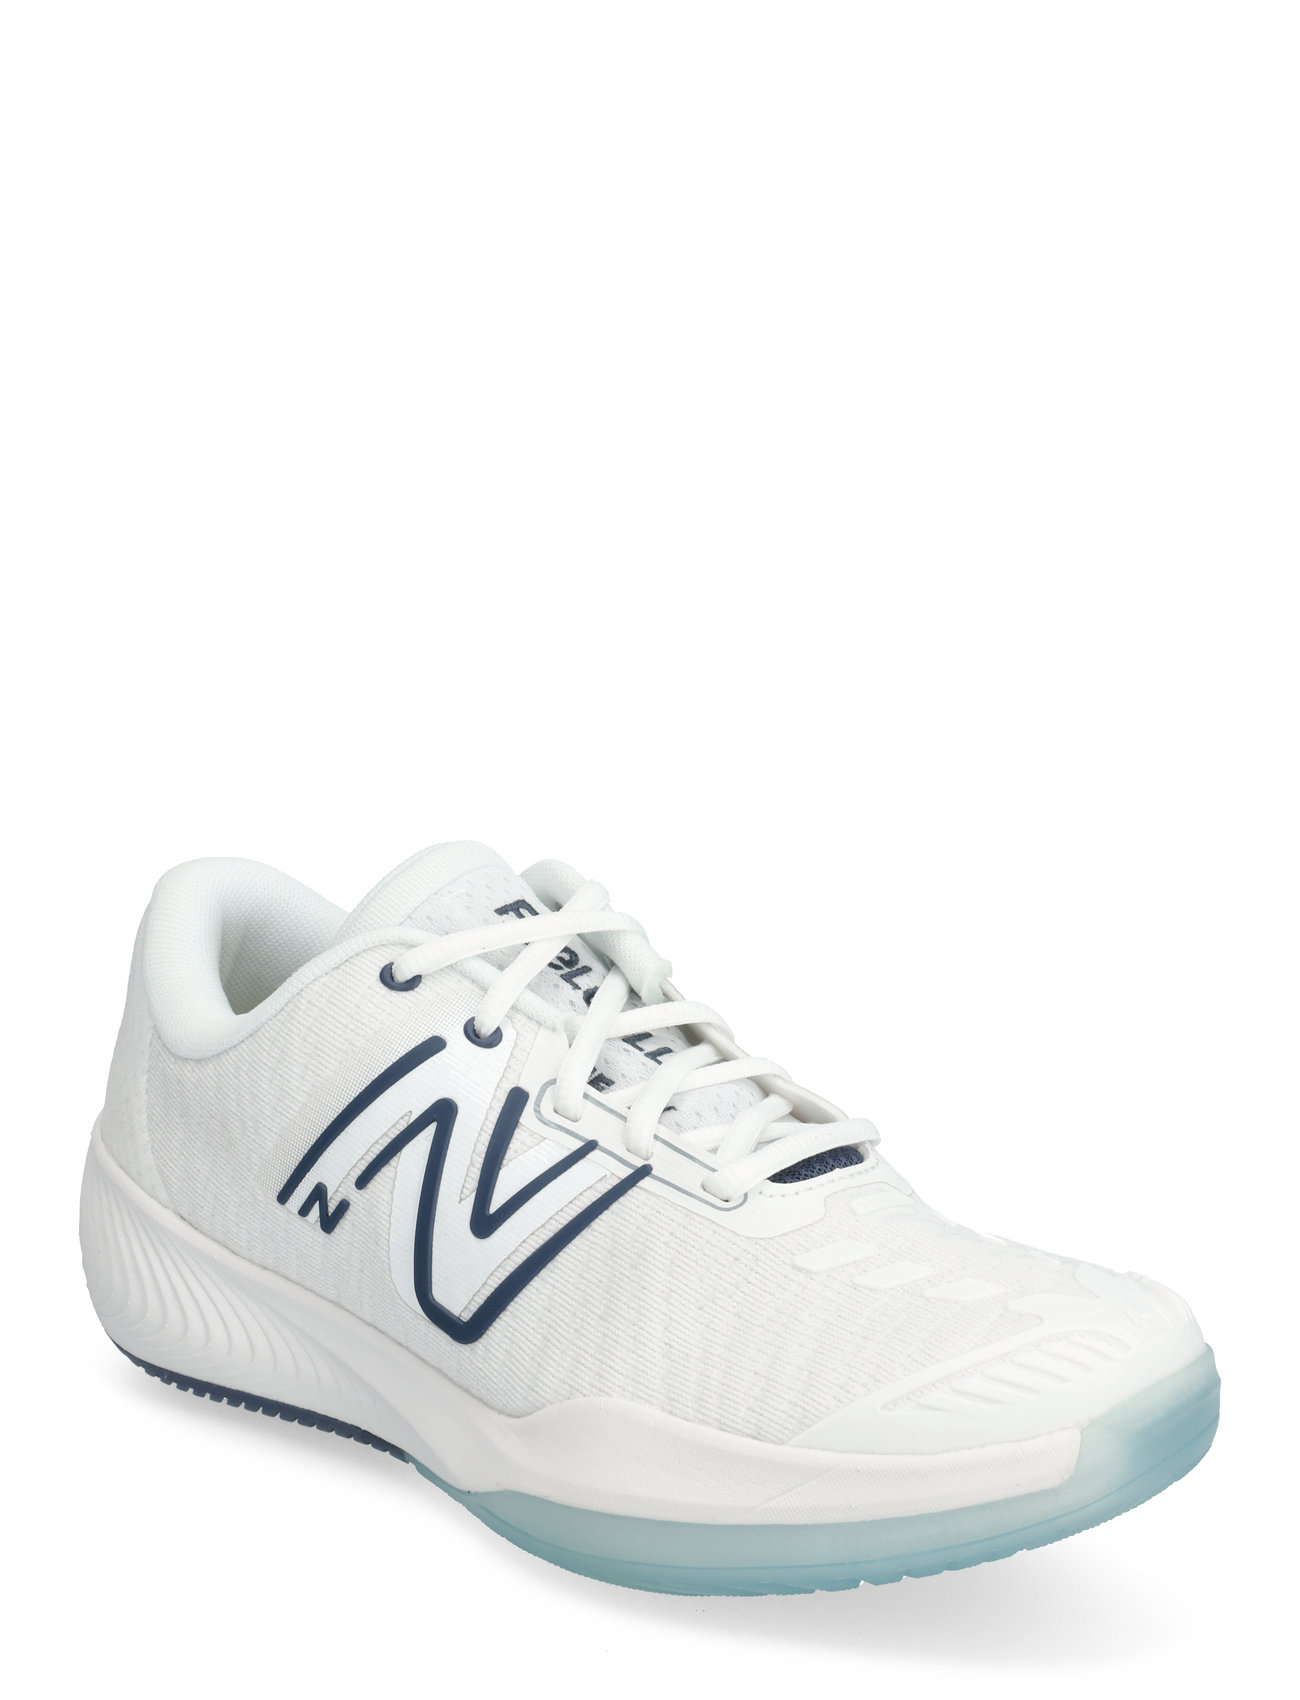 New Balance Fuelcell 996V5 Sport Sport Shoes Racketsports Shoes Tennis Shoes White New Balance